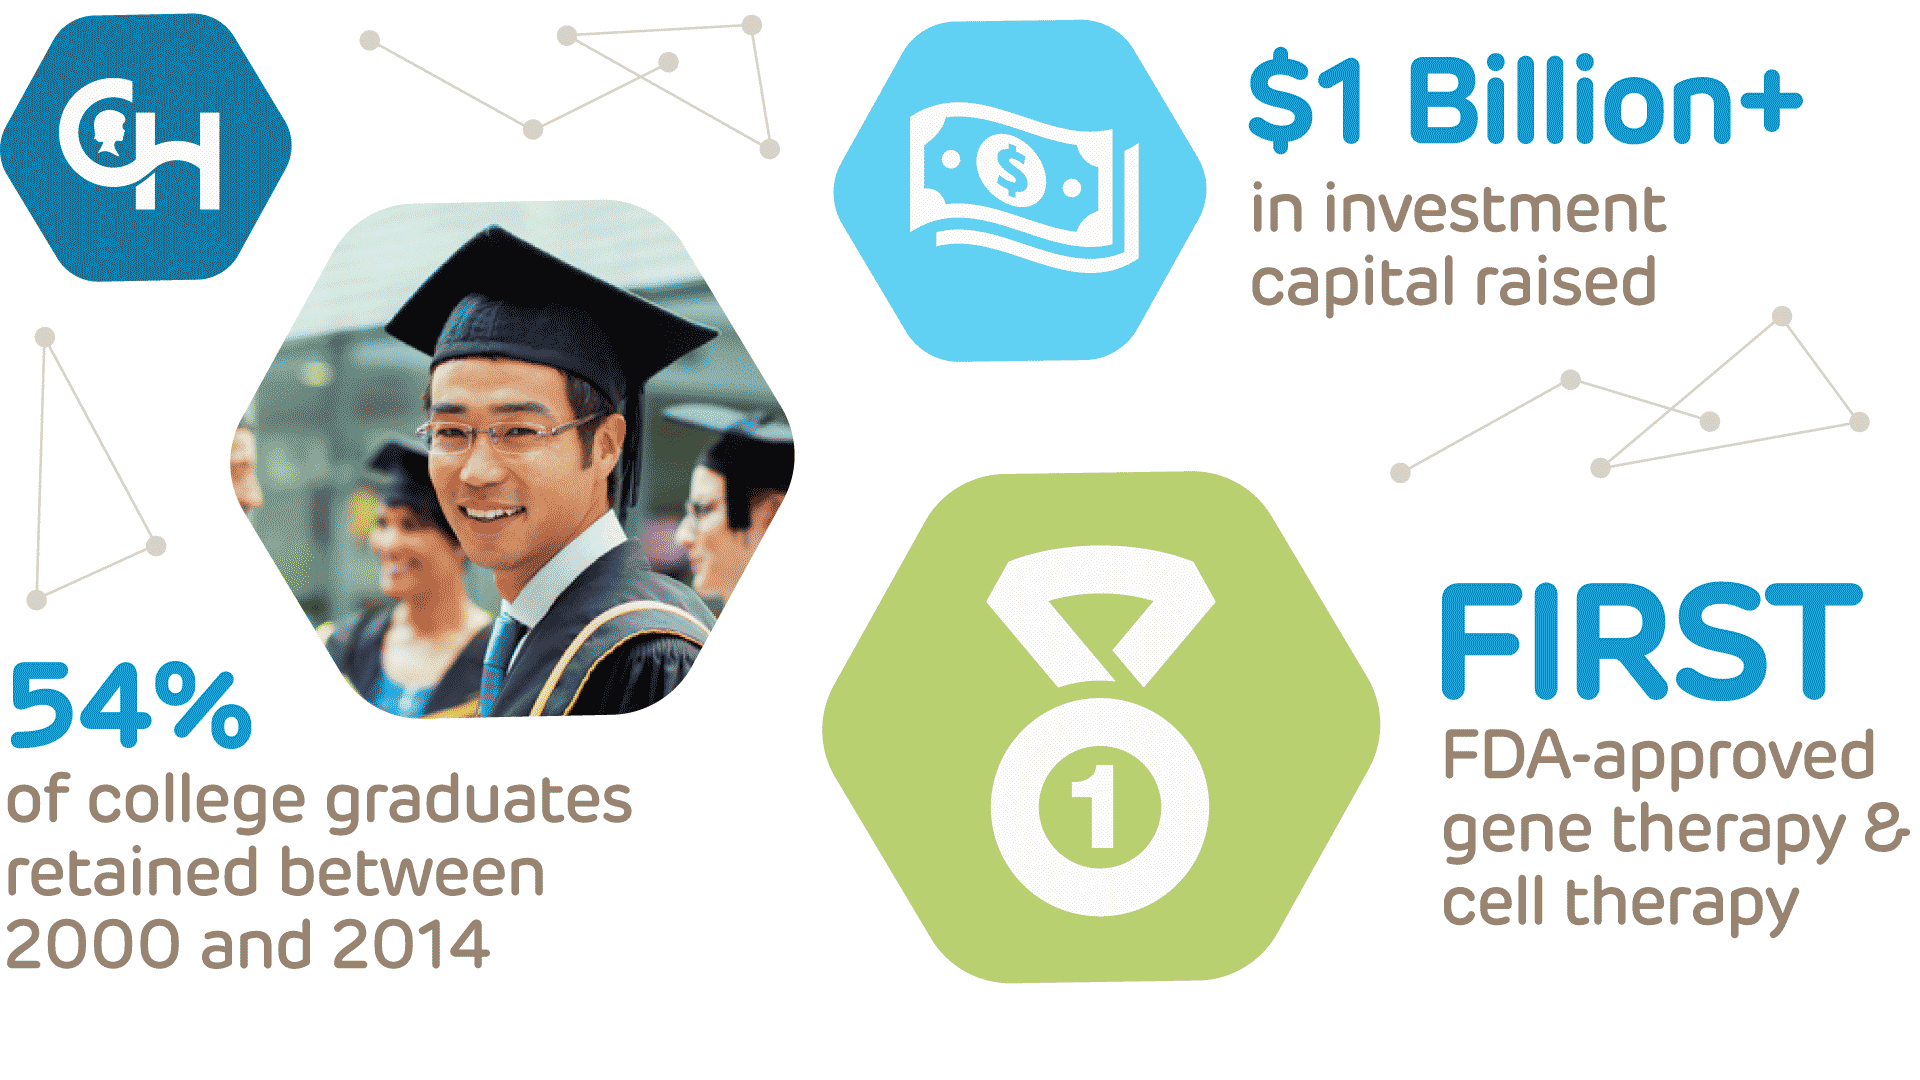 Info Graphic: $1 Billion+ investment capital raised. 54% college graduates retained between 2000 and 2014. First FDA-approved gene therapy & cell therapy.